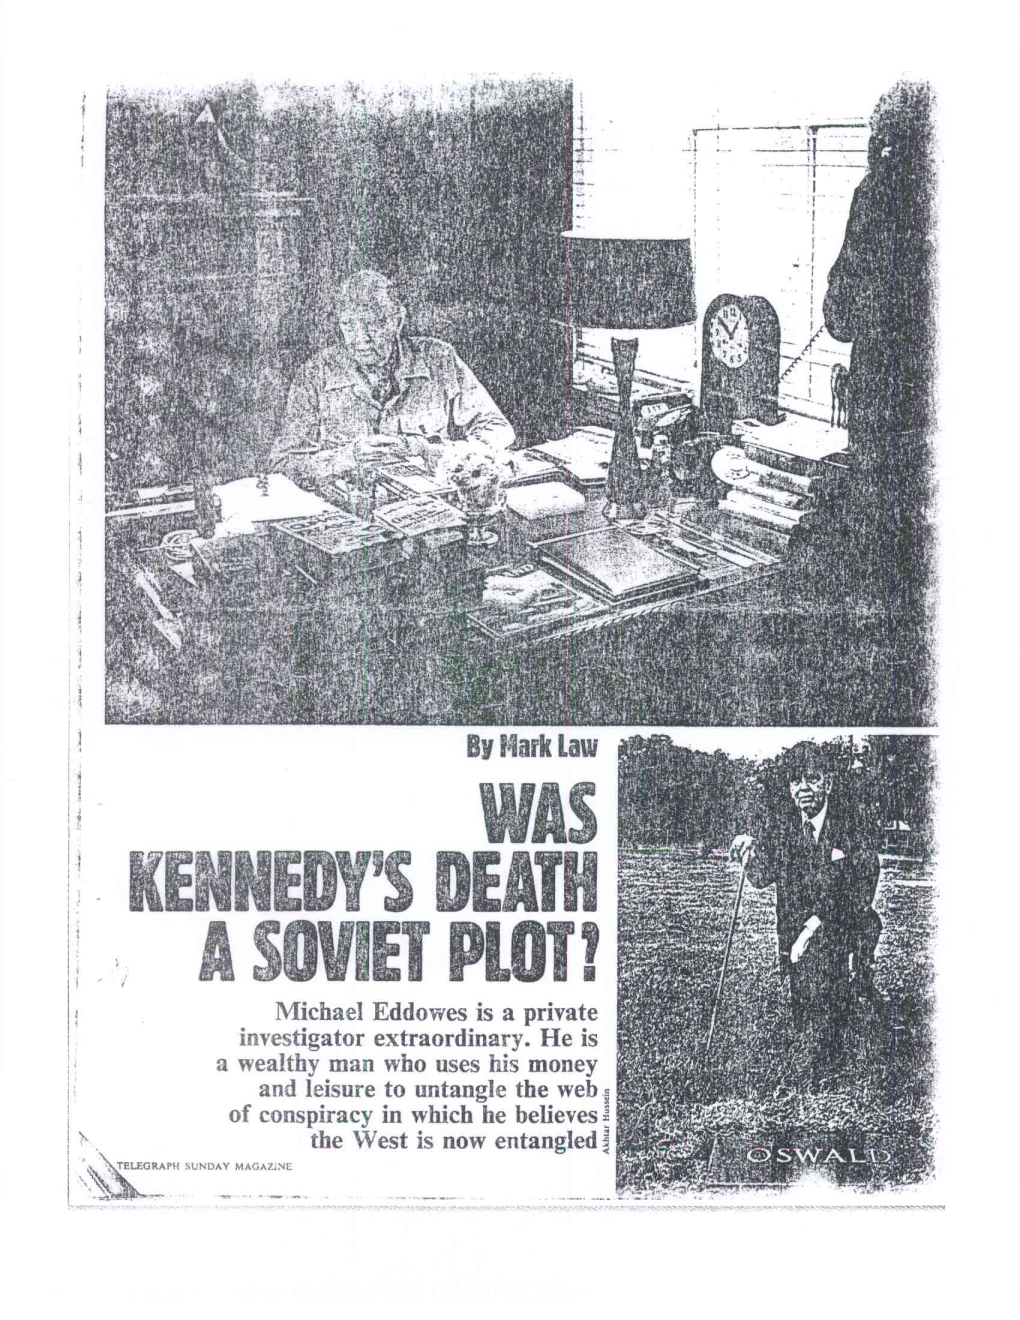 WAS KENNEDY's DEATH a SOVIET PLOT? Michael Eddowes Is a Private Investigator Extraordinary